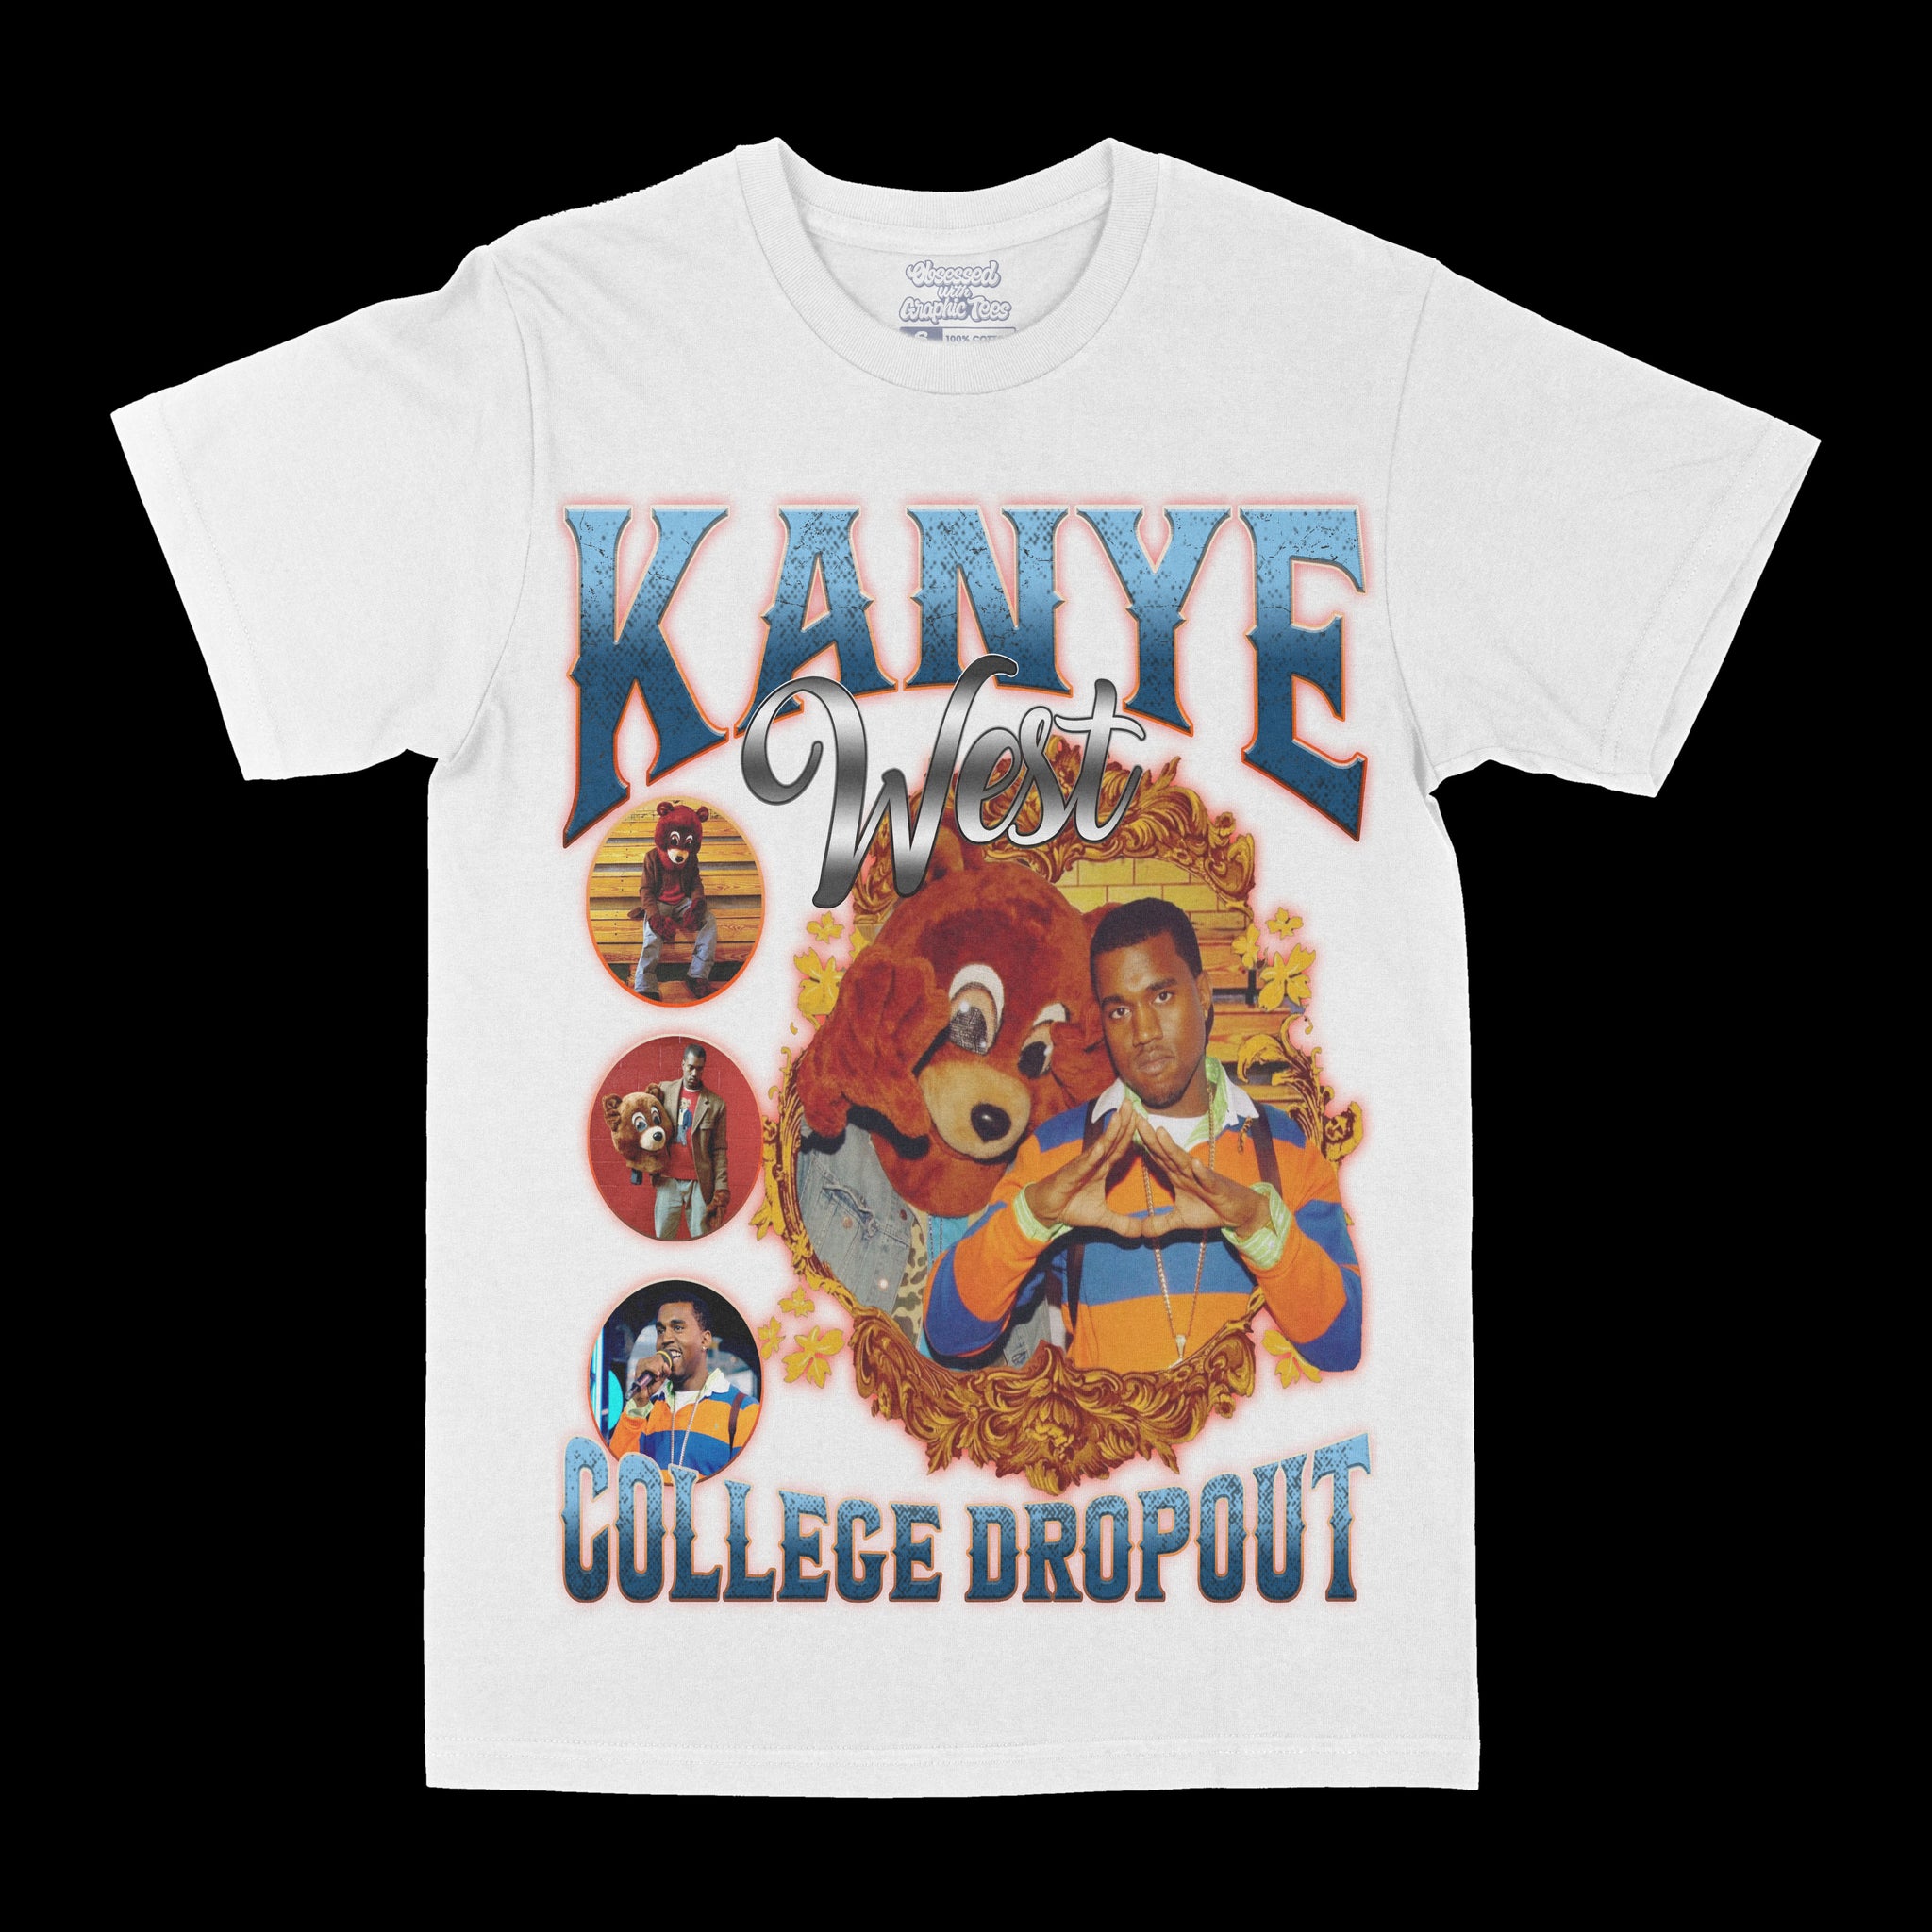 Kanye West The College IV Dropout Graphic Tee